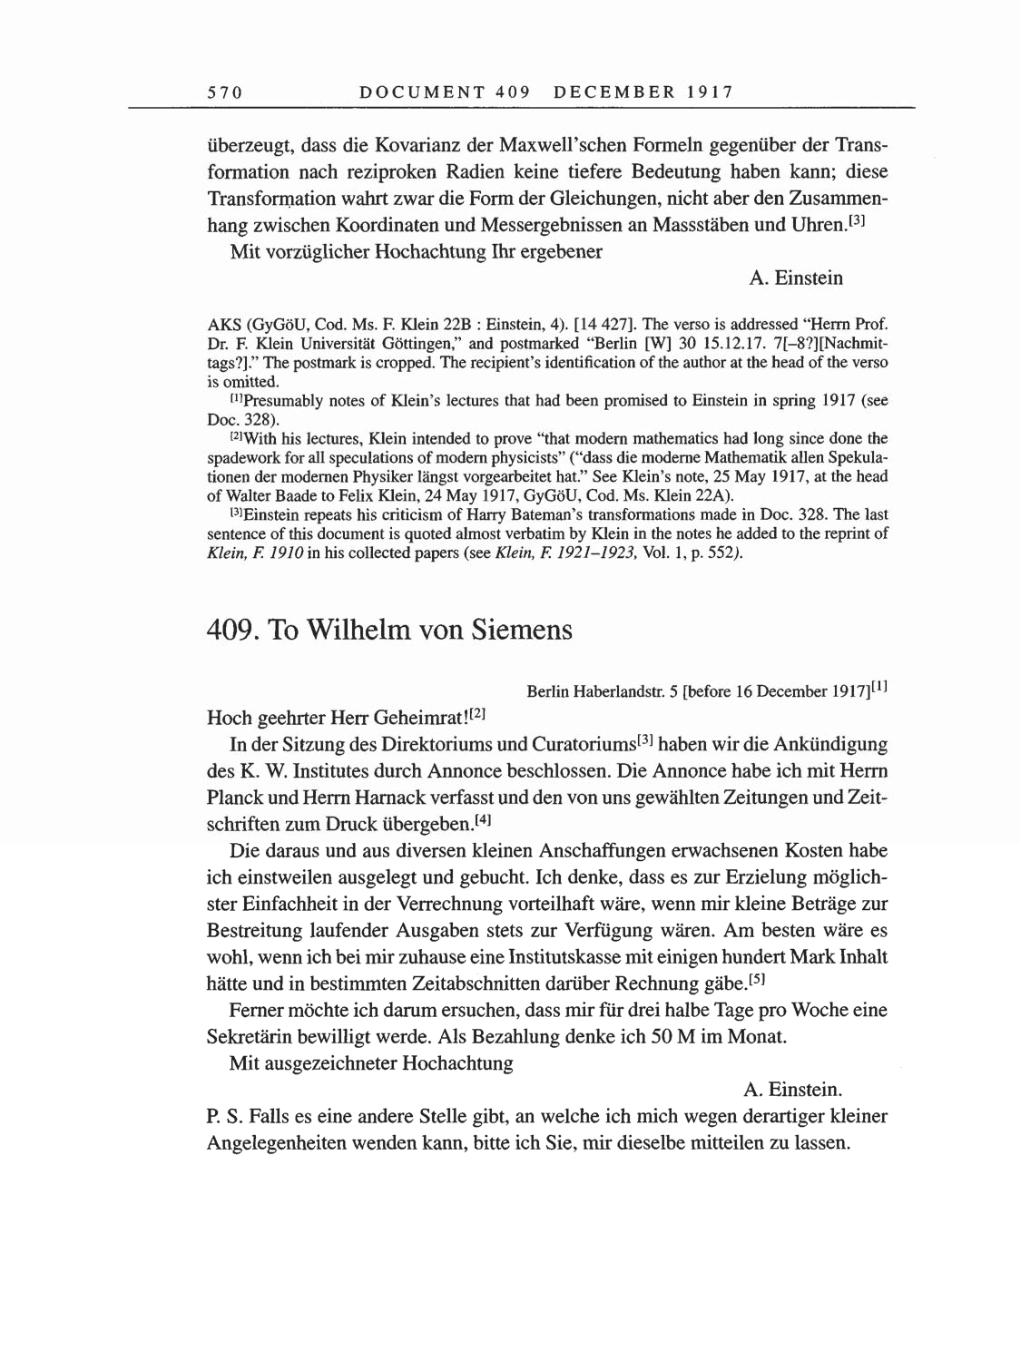 Volume 8, Part A: The Berlin Years: Correspondence 1914-1917 page 570